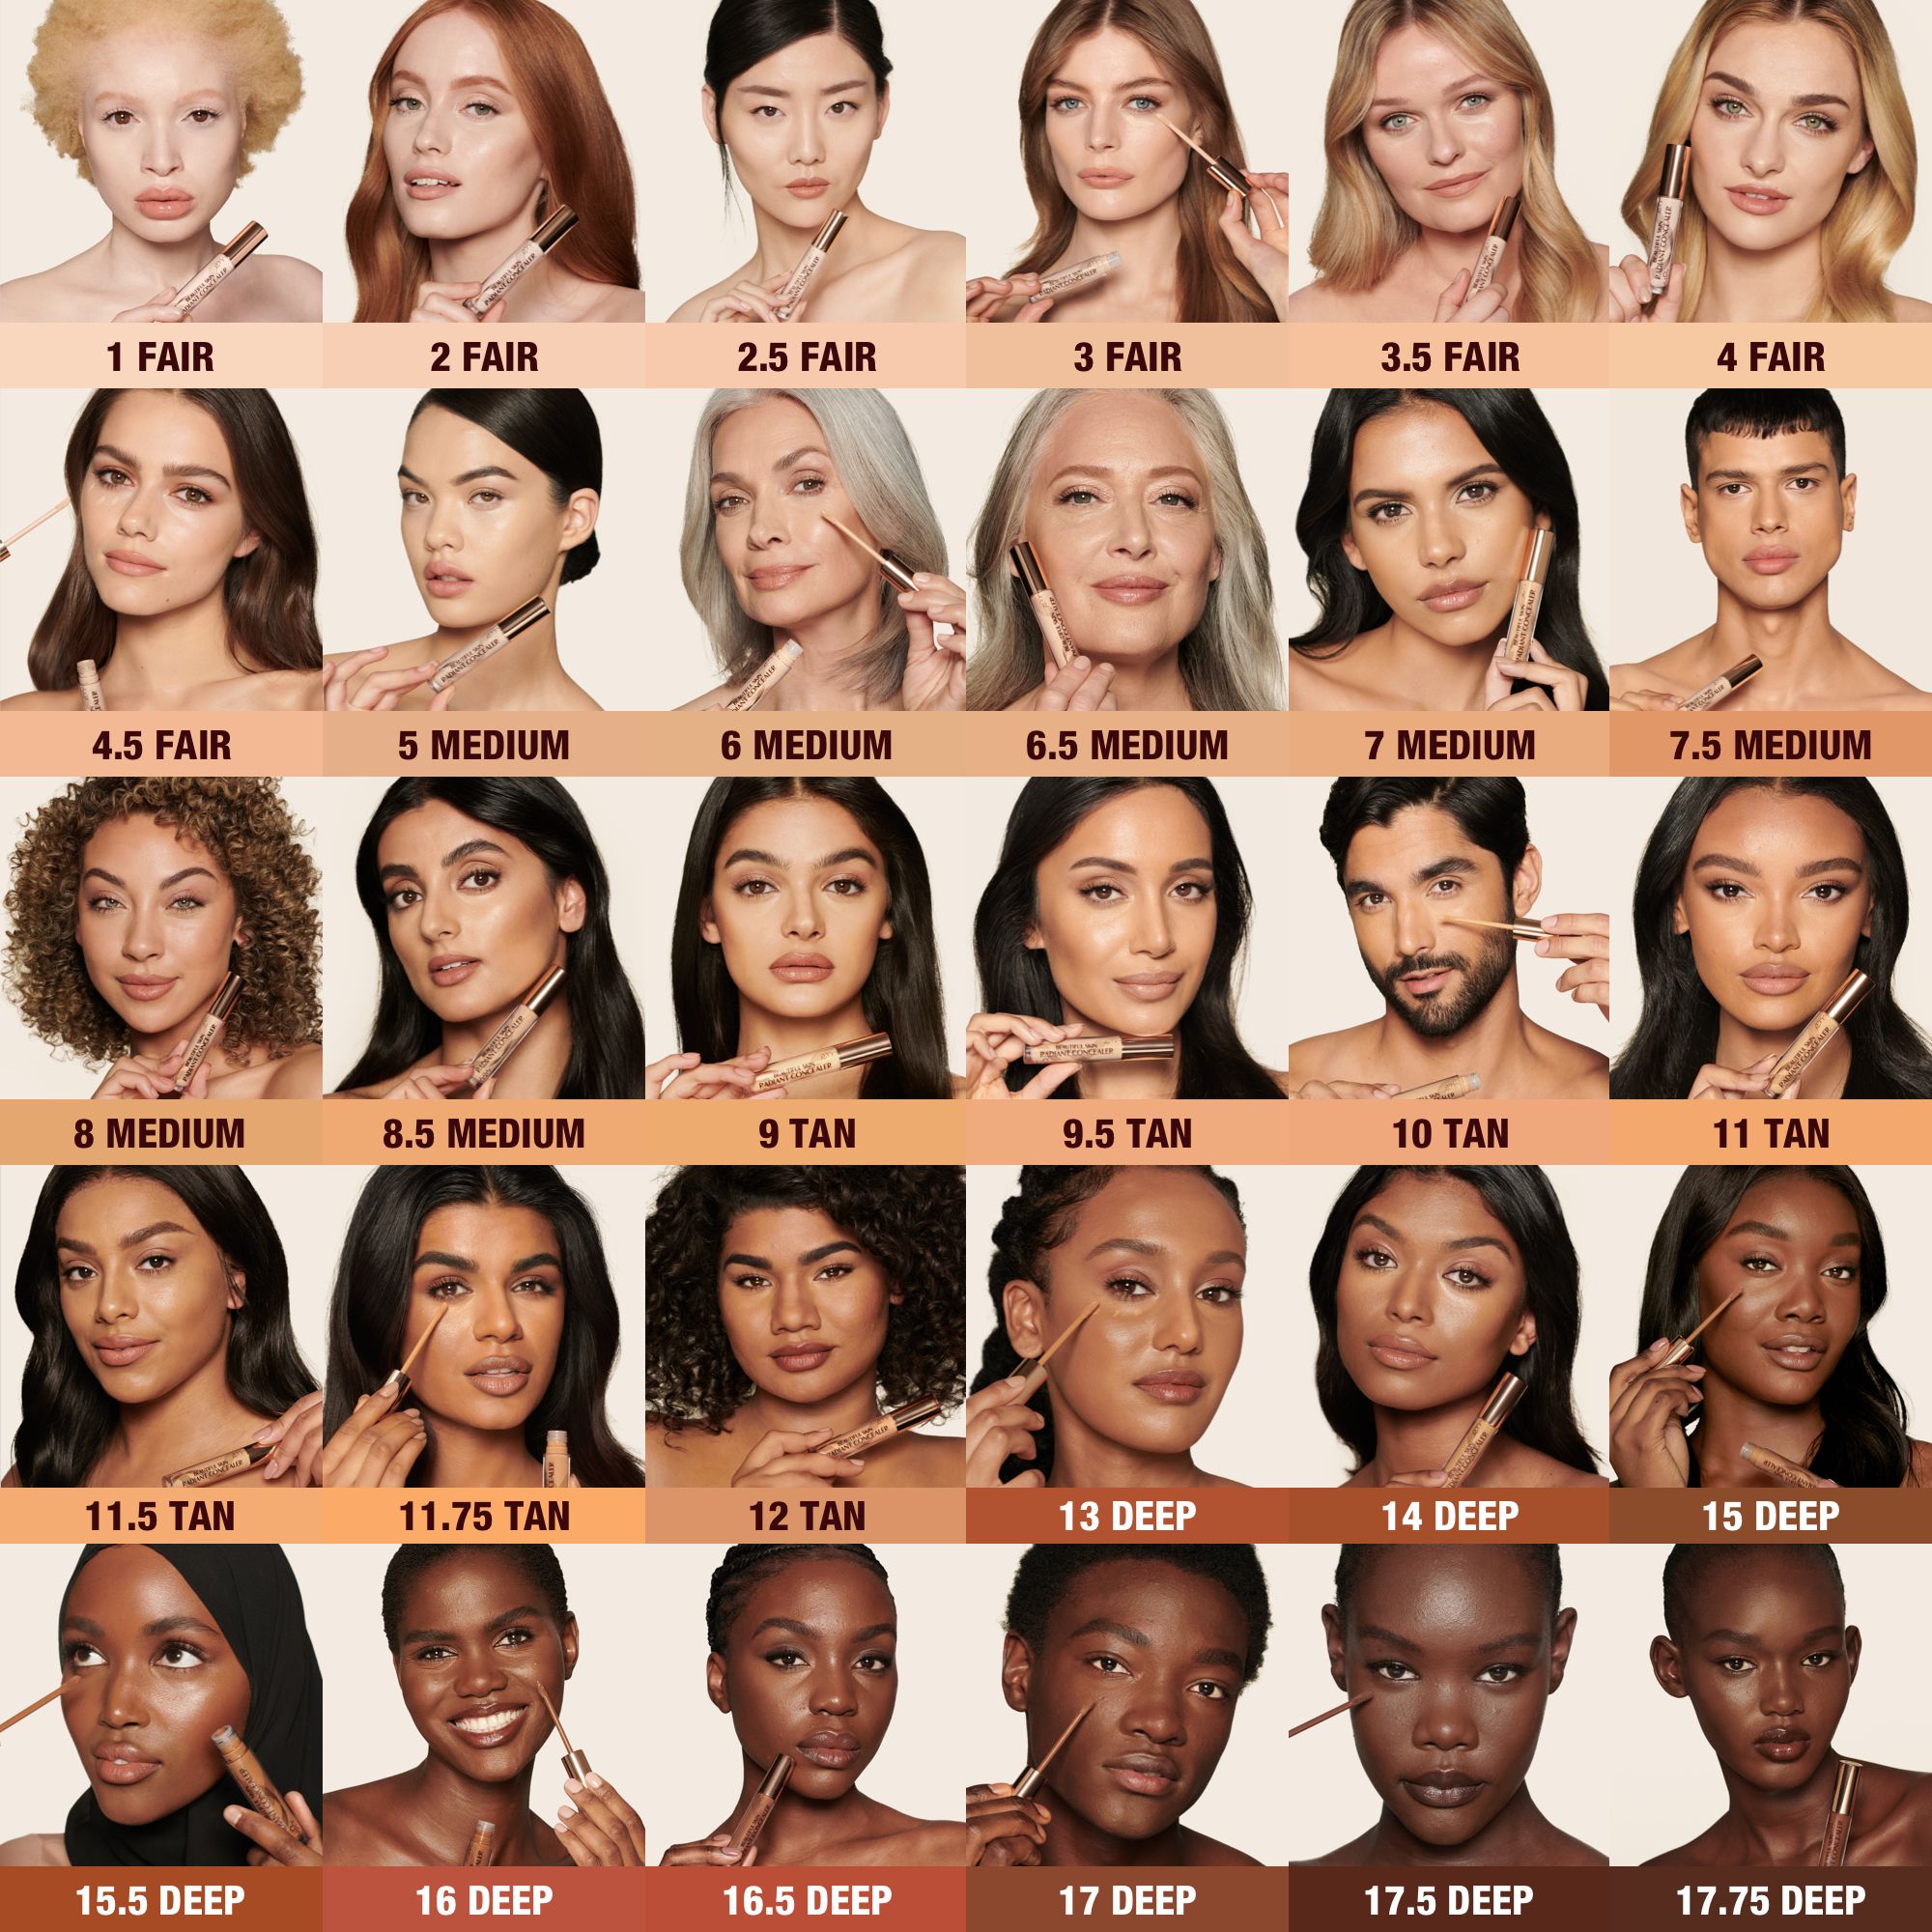 Charlotte's Beautiful Skin Radiant Concealer models in all 30 shades